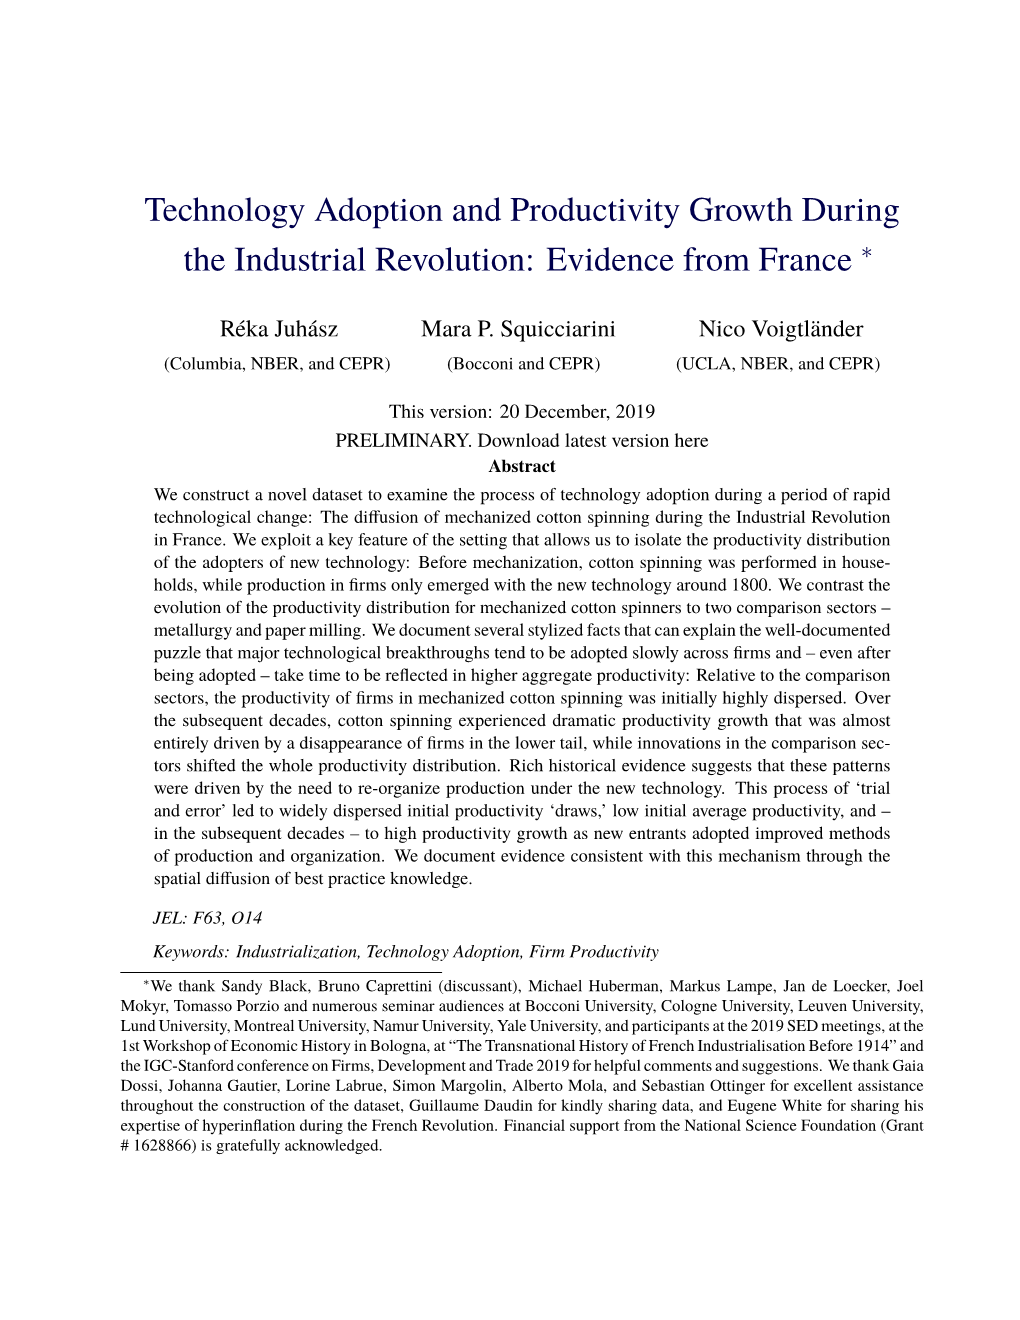 Technology Adoption and Productivity Growth During the Industrial Revolution: Evidence from France ∗